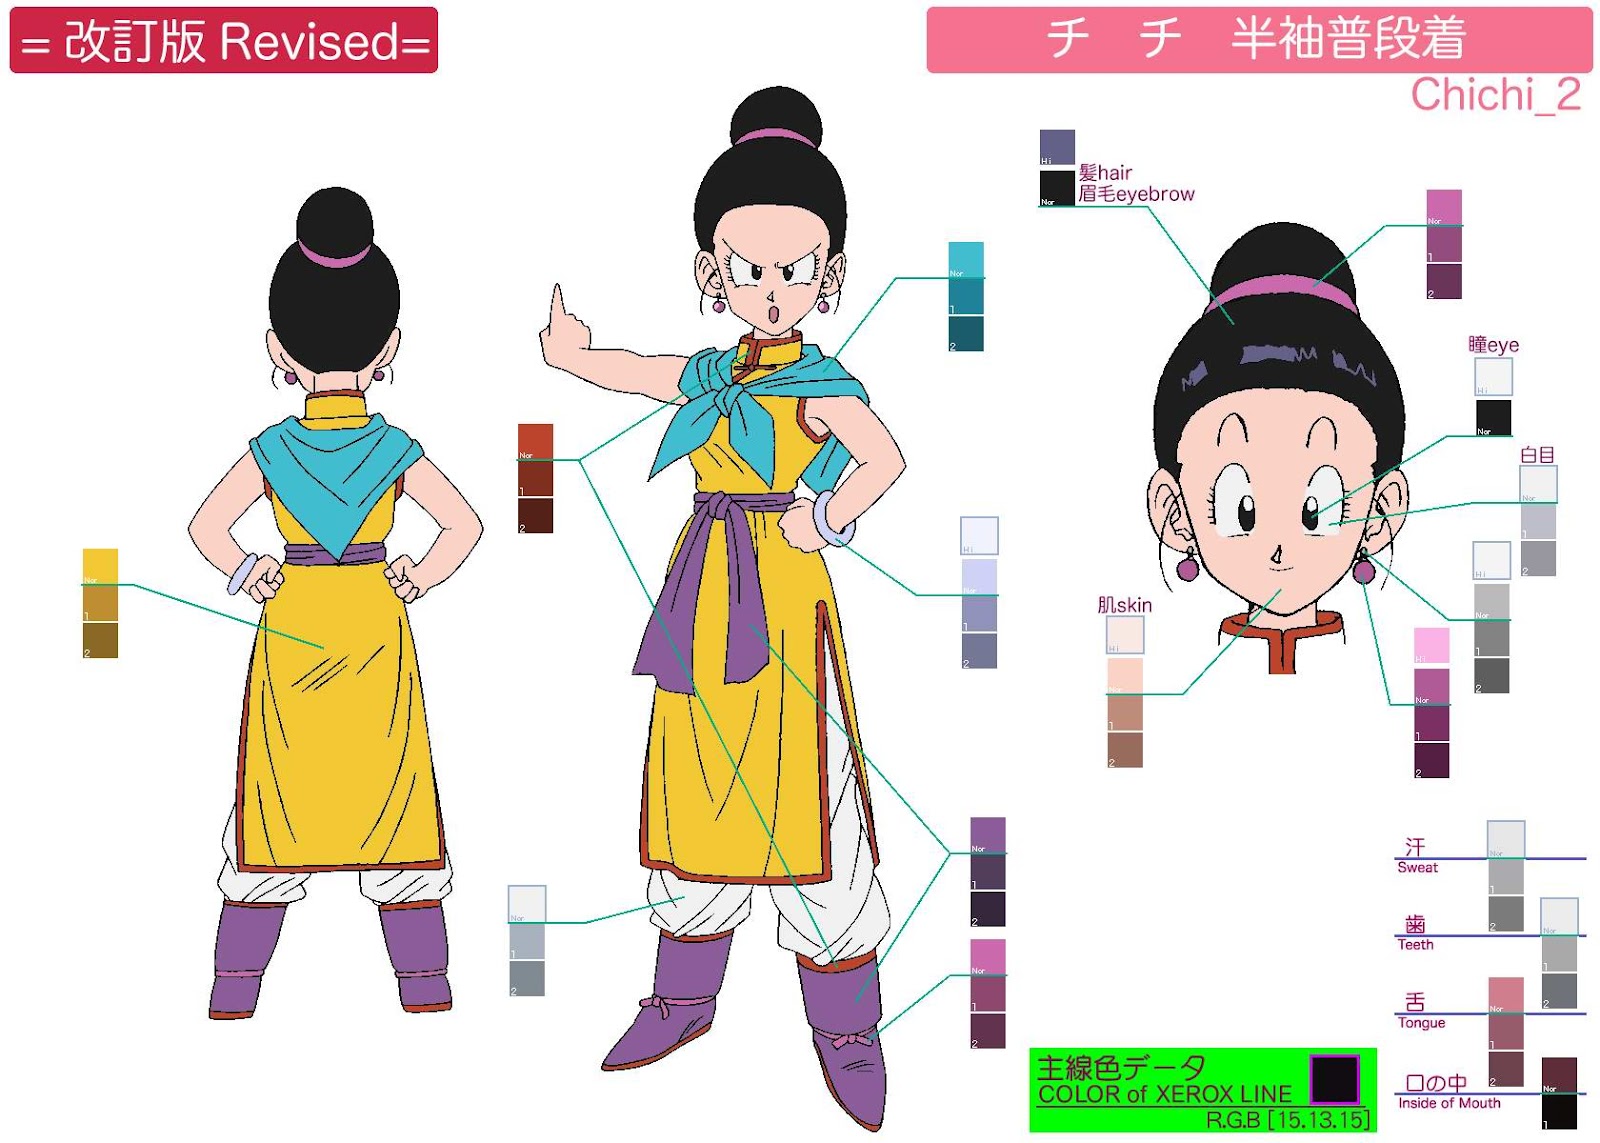 Chi-Chi (チ チ) is the daughter of the Ox-King who later marries Goku and bec...